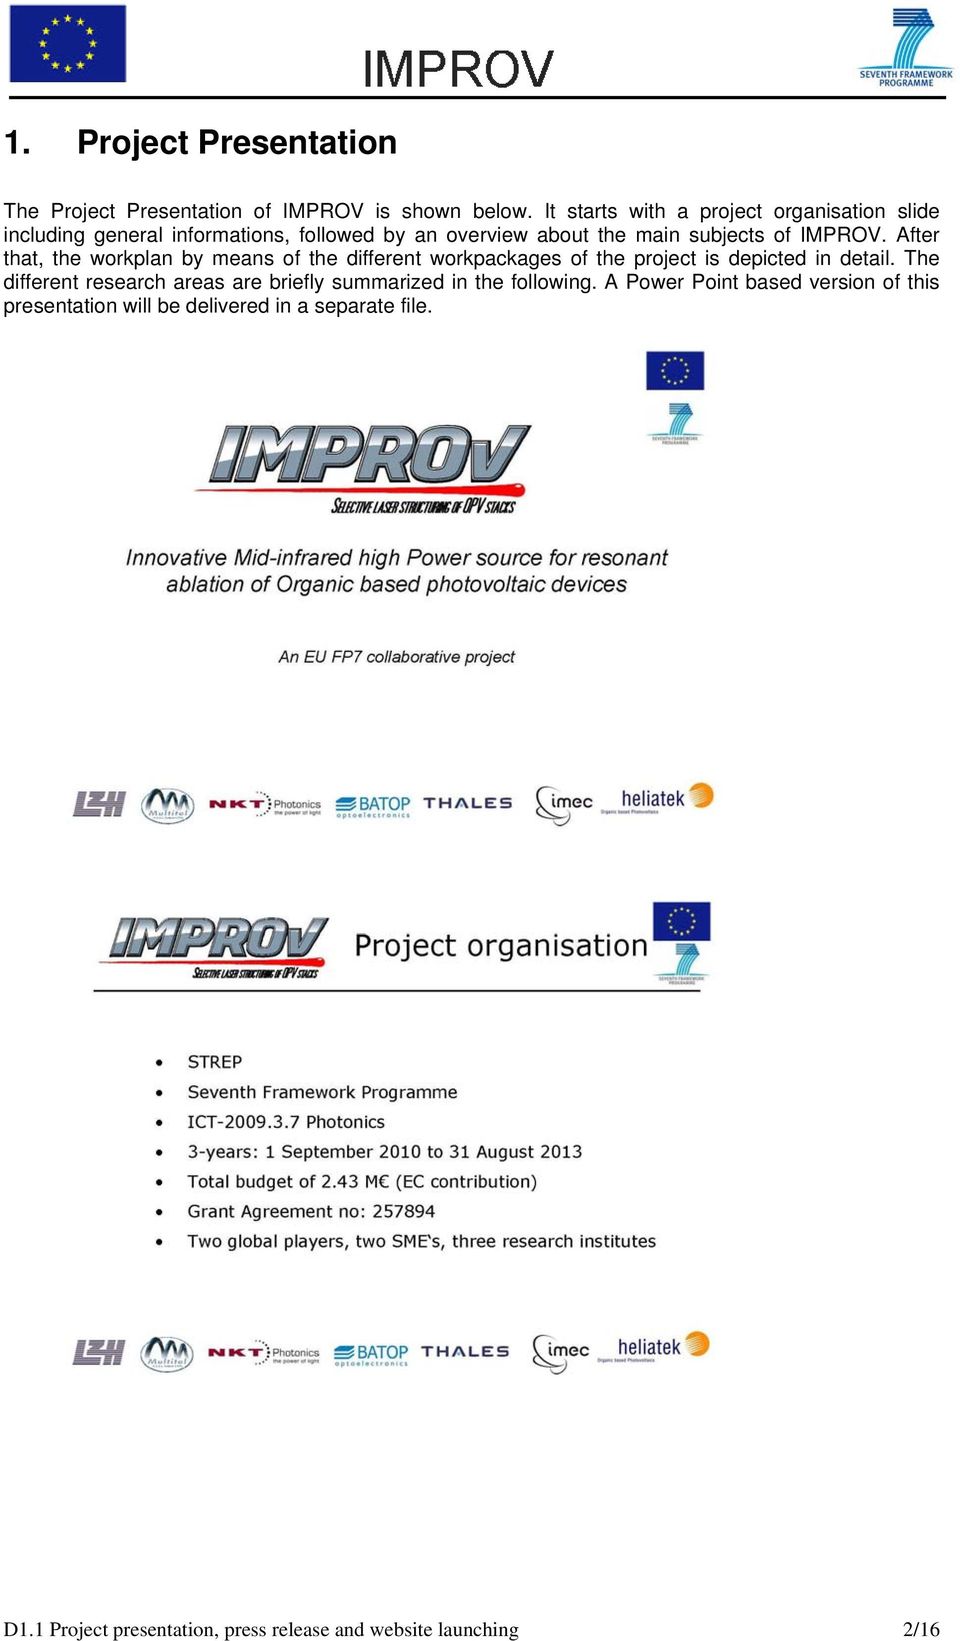 After that, the workplan by means of the different workpackages of the project is depicted in detail.